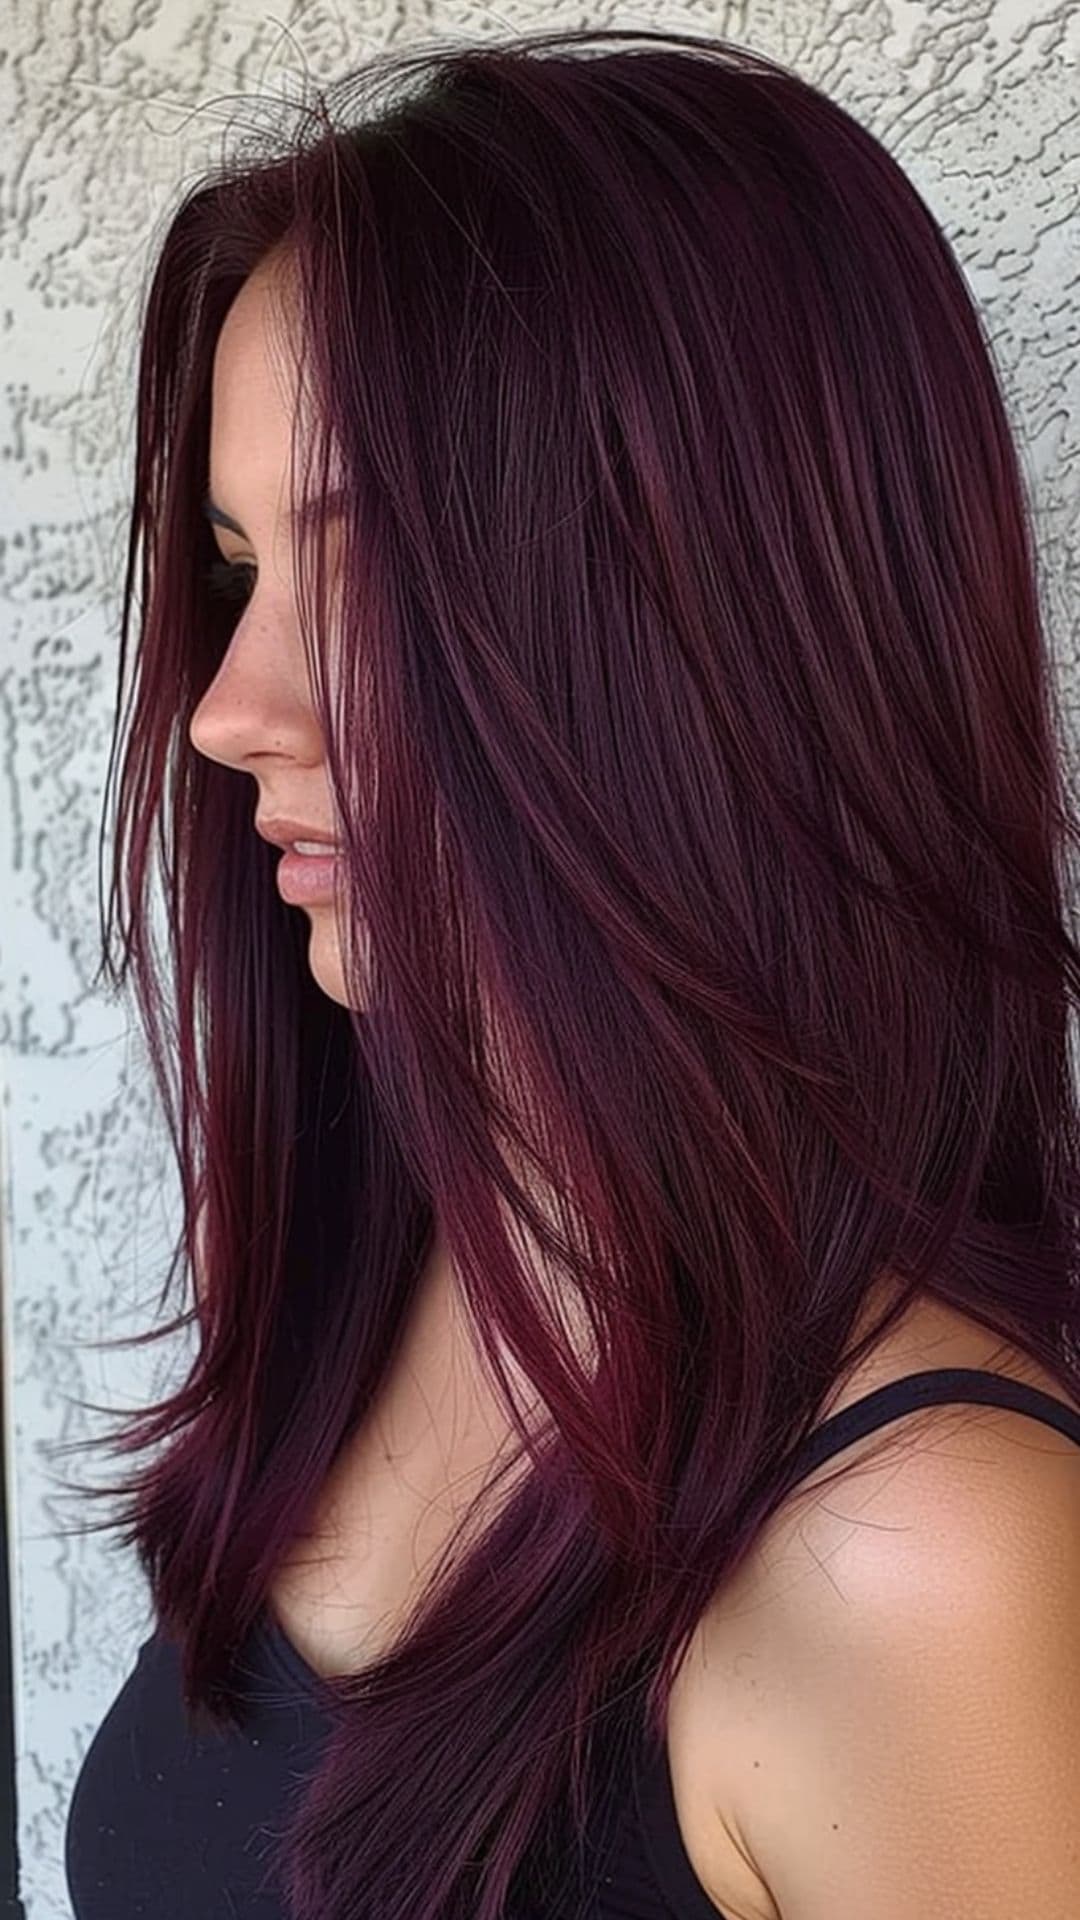 A woman modelling a deep and dark red violet hair.